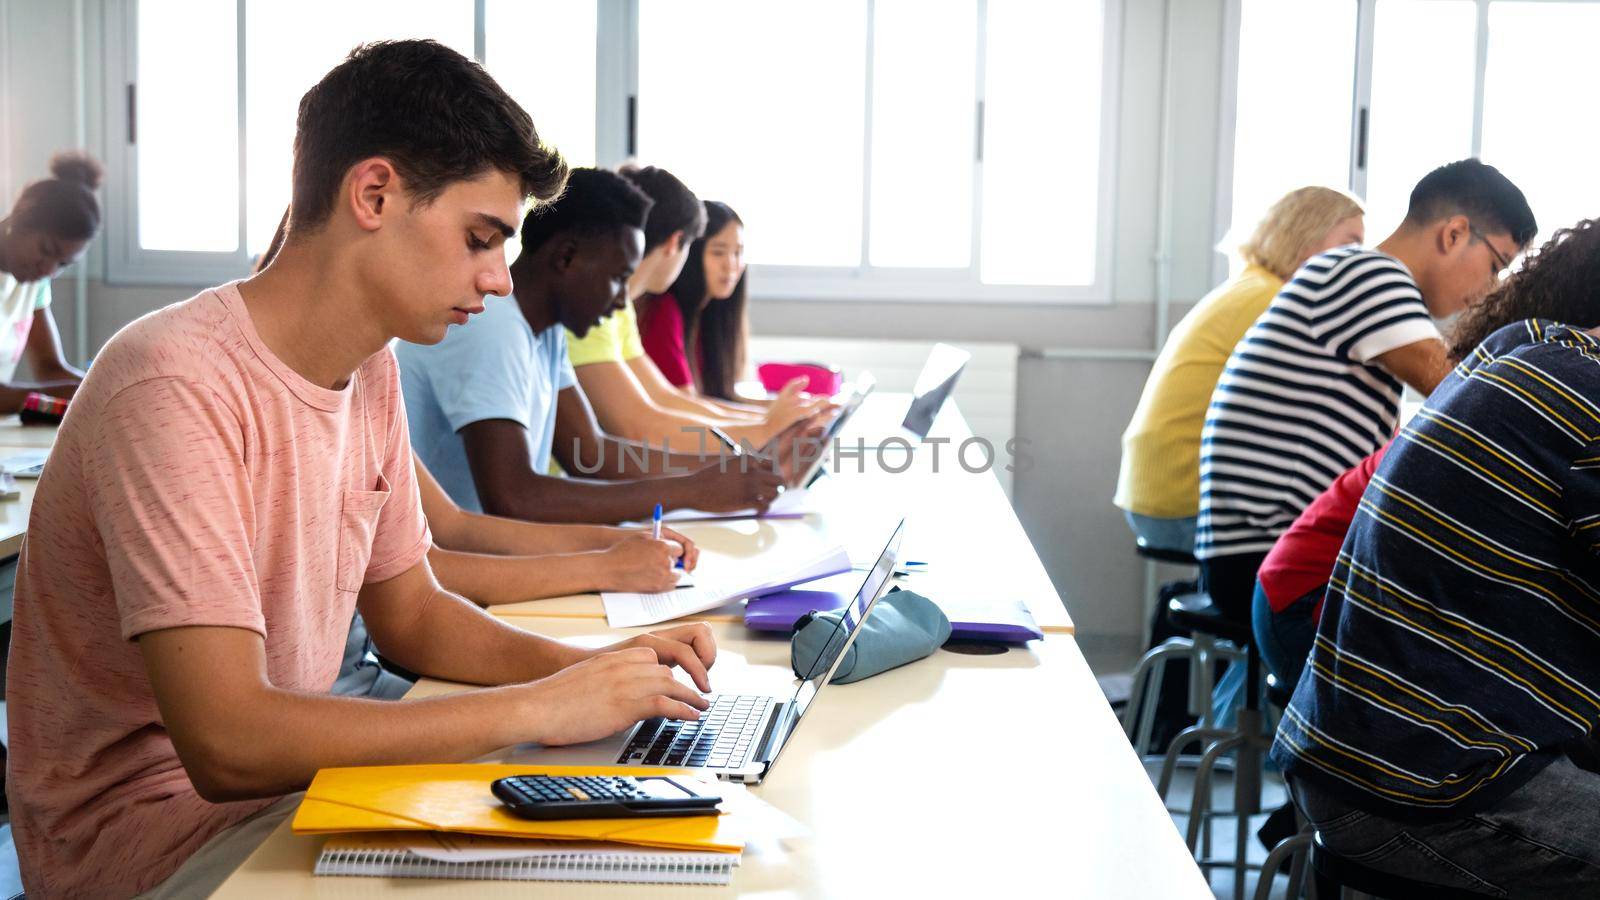 Side view of group of multiracial high school students studying and using laptops in class. Education concept.